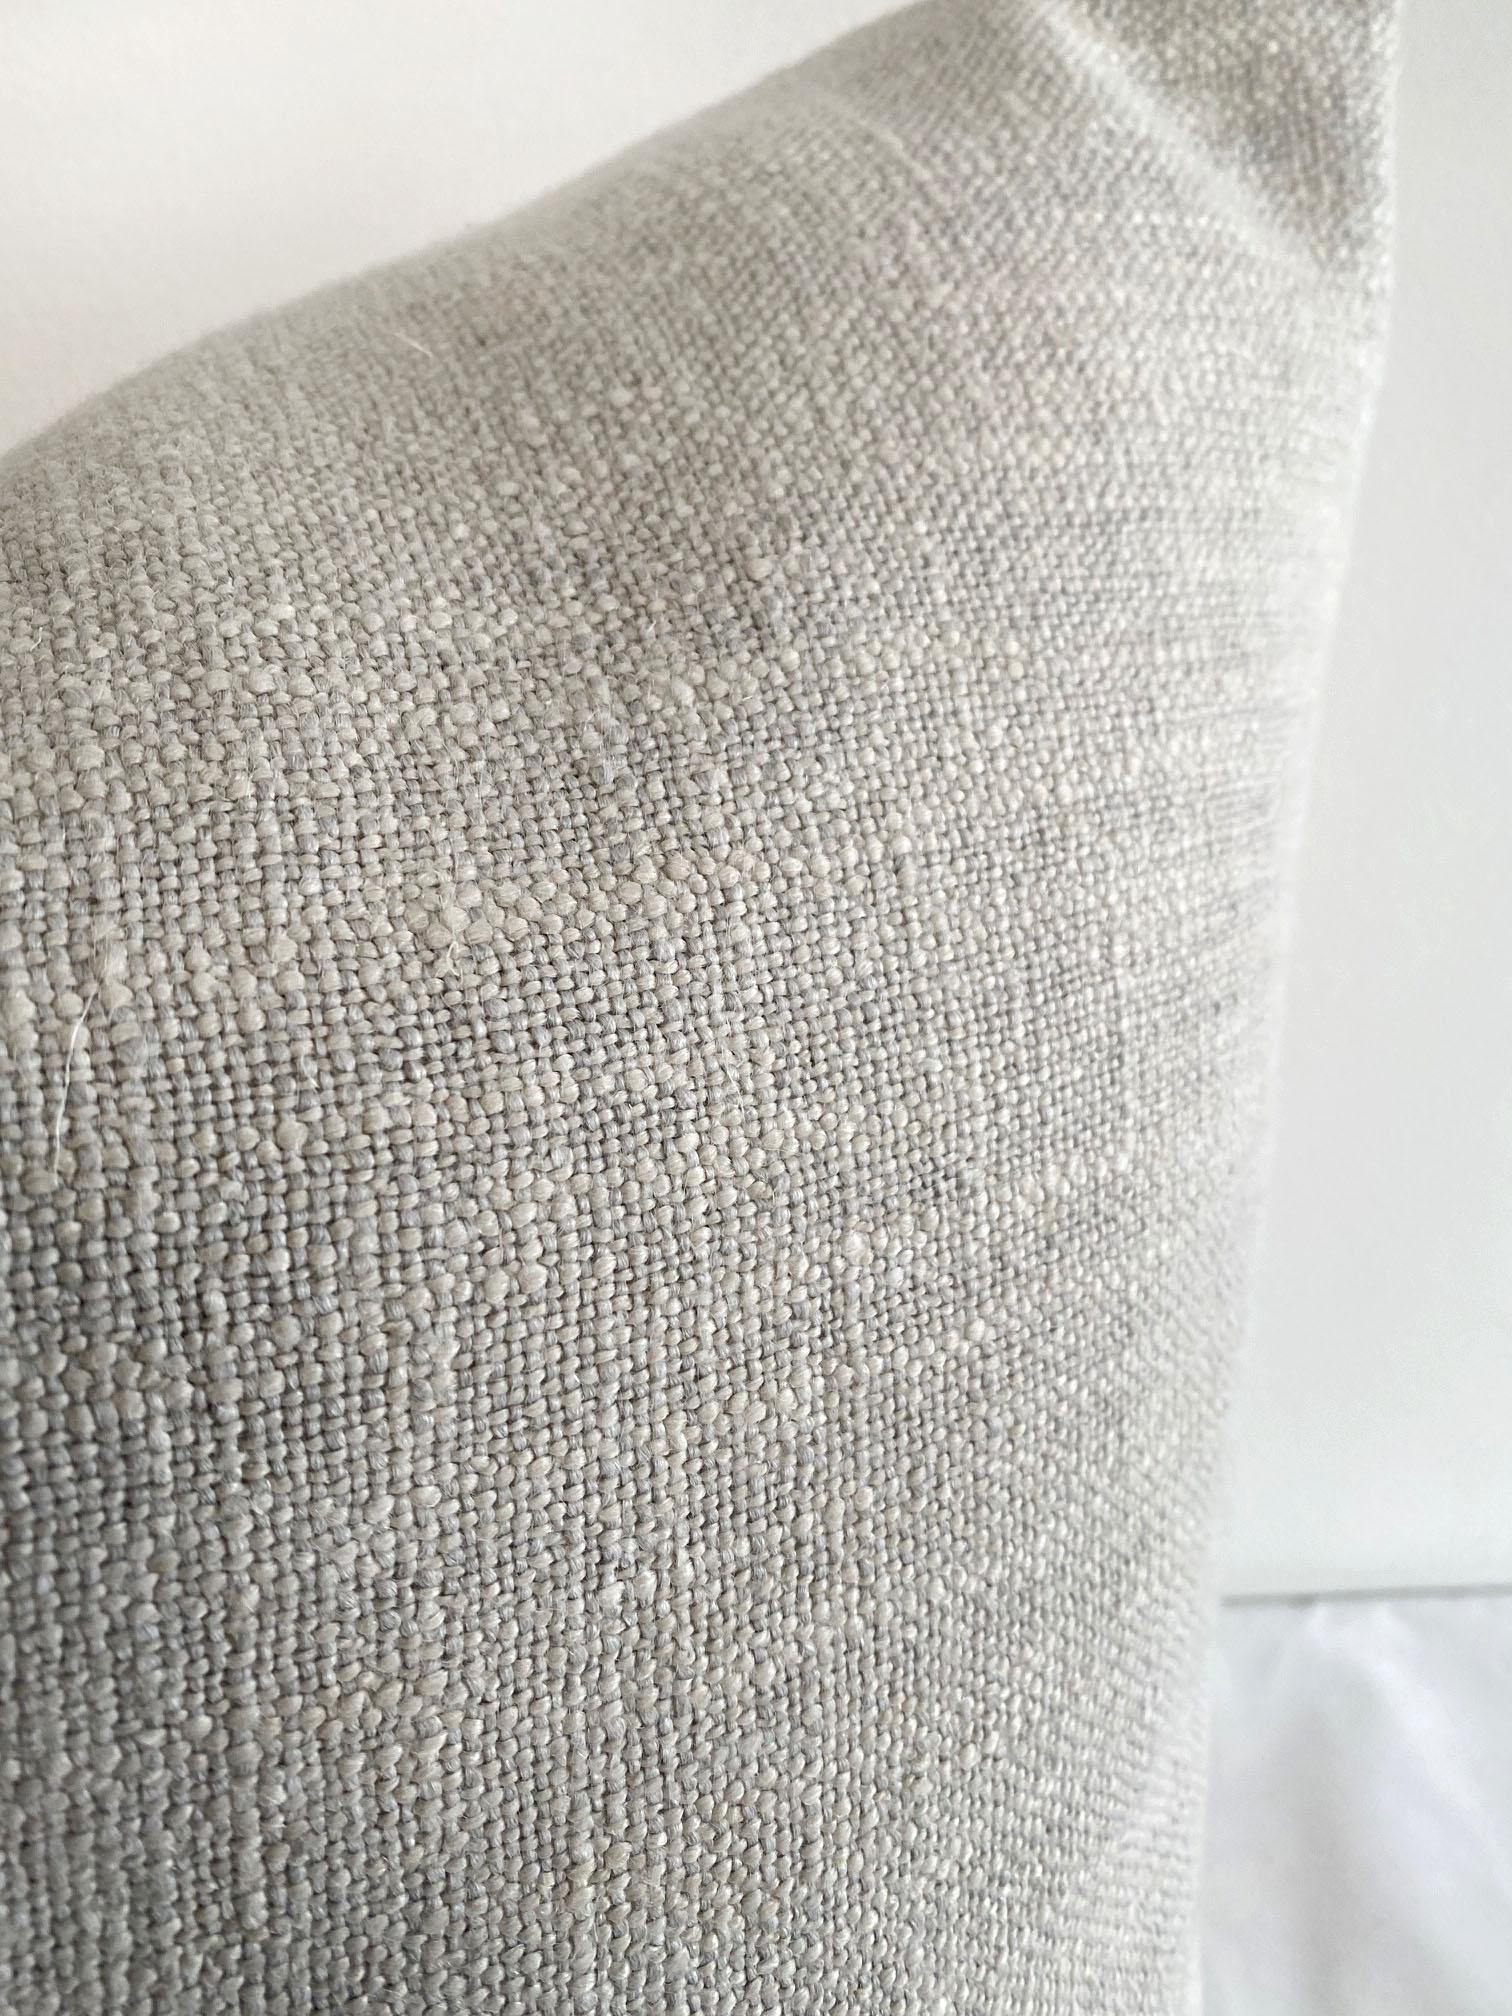 Custom silver snow accent pillow 
Size 22 x 22
Includes down feather insert
Zipper closure with overlocked edges.